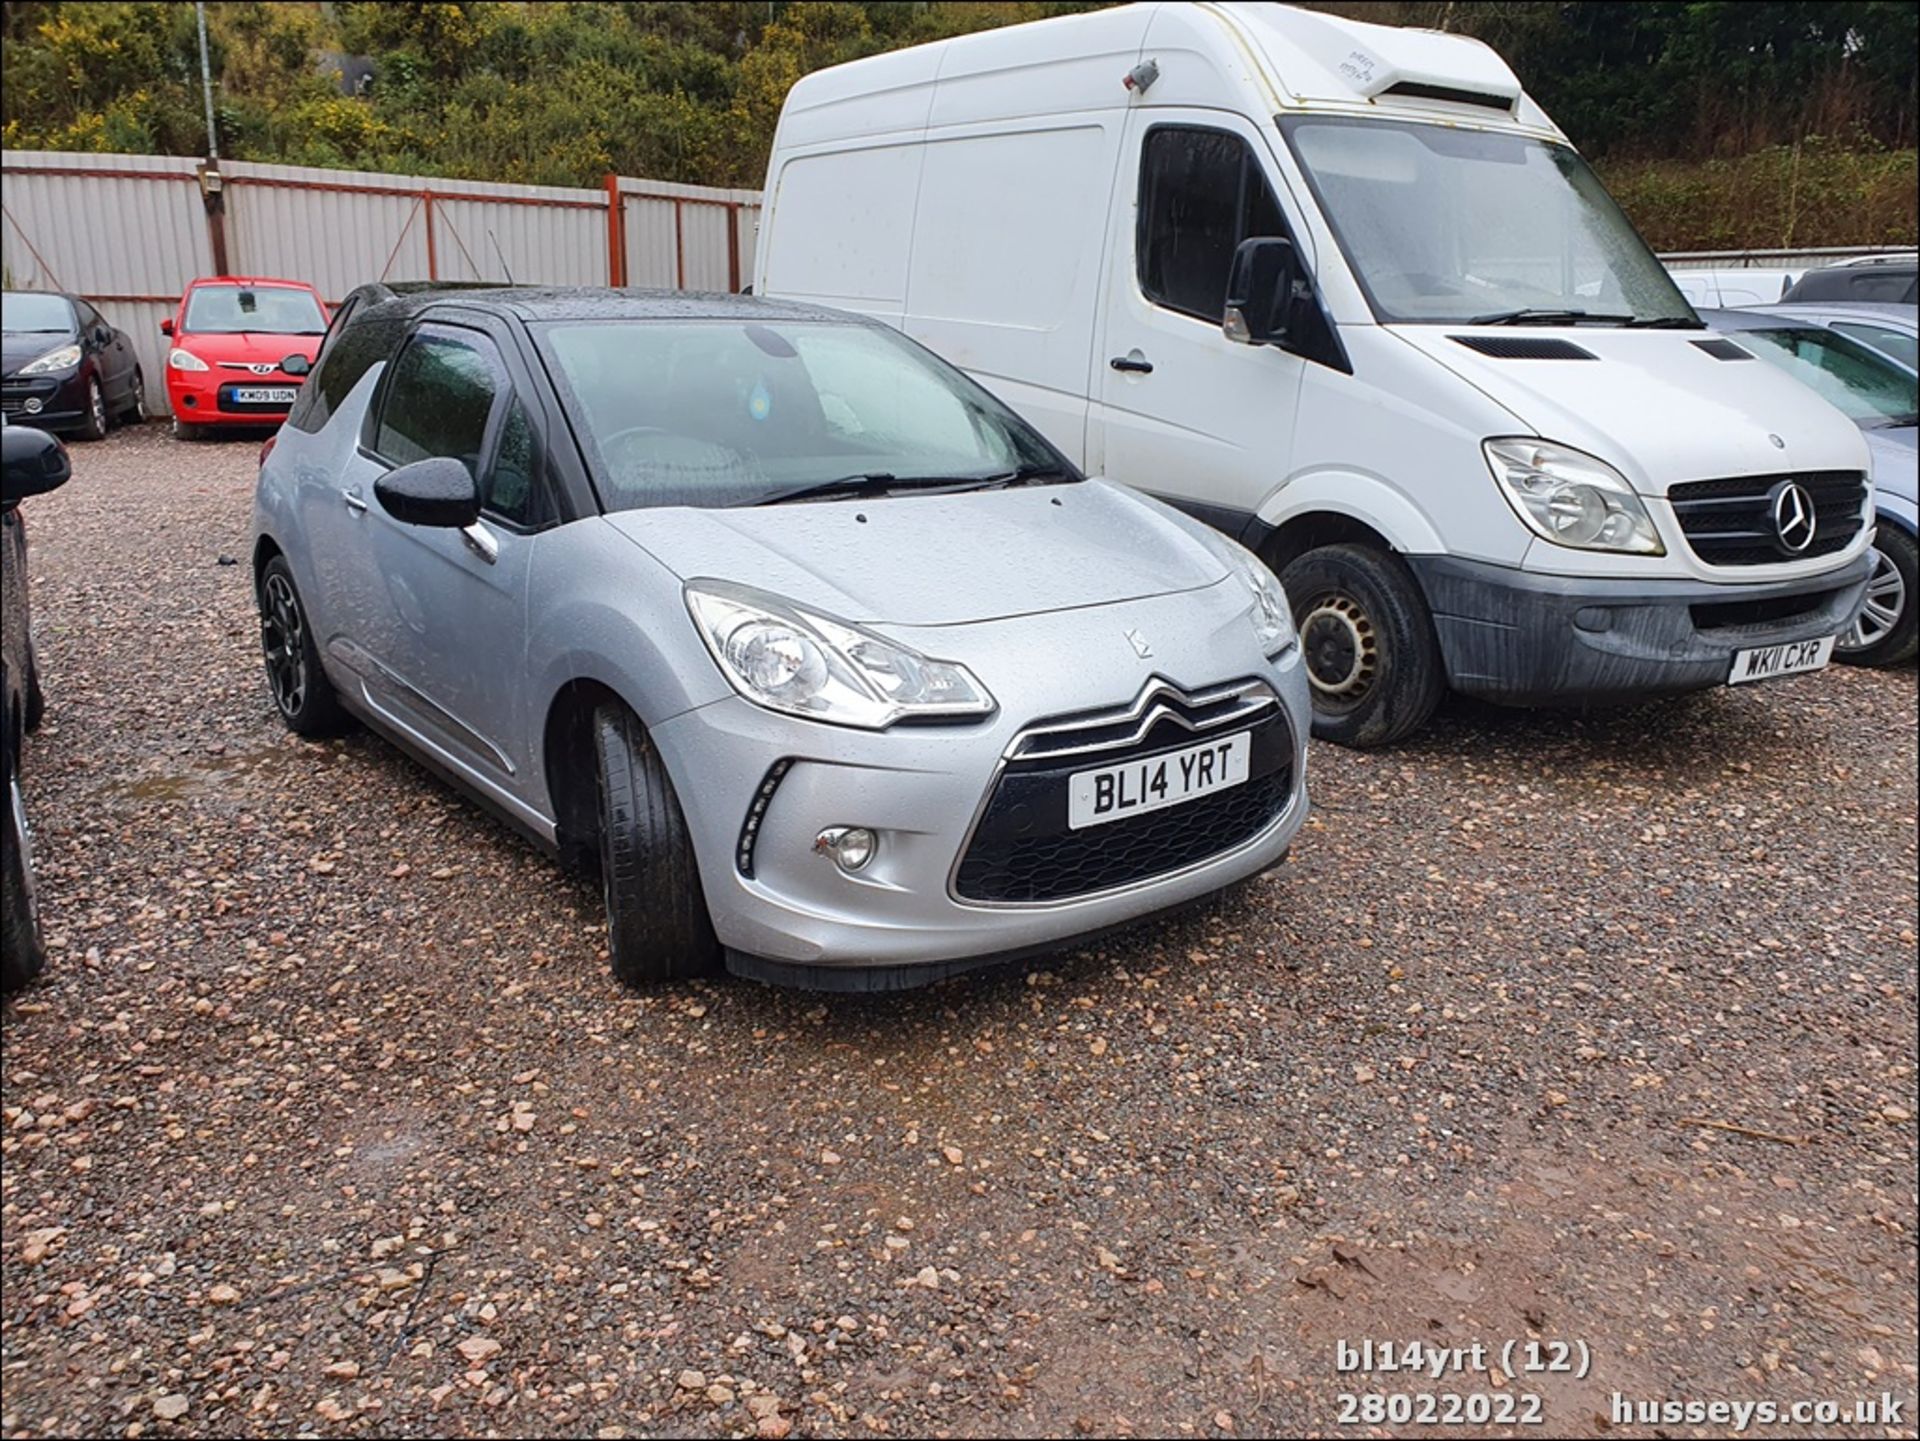 14/14 CITROEN DS3 DSTYLE + E-HDI - 1560cc 3dr Hatchback (Silver, 122k) - Image 13 of 25